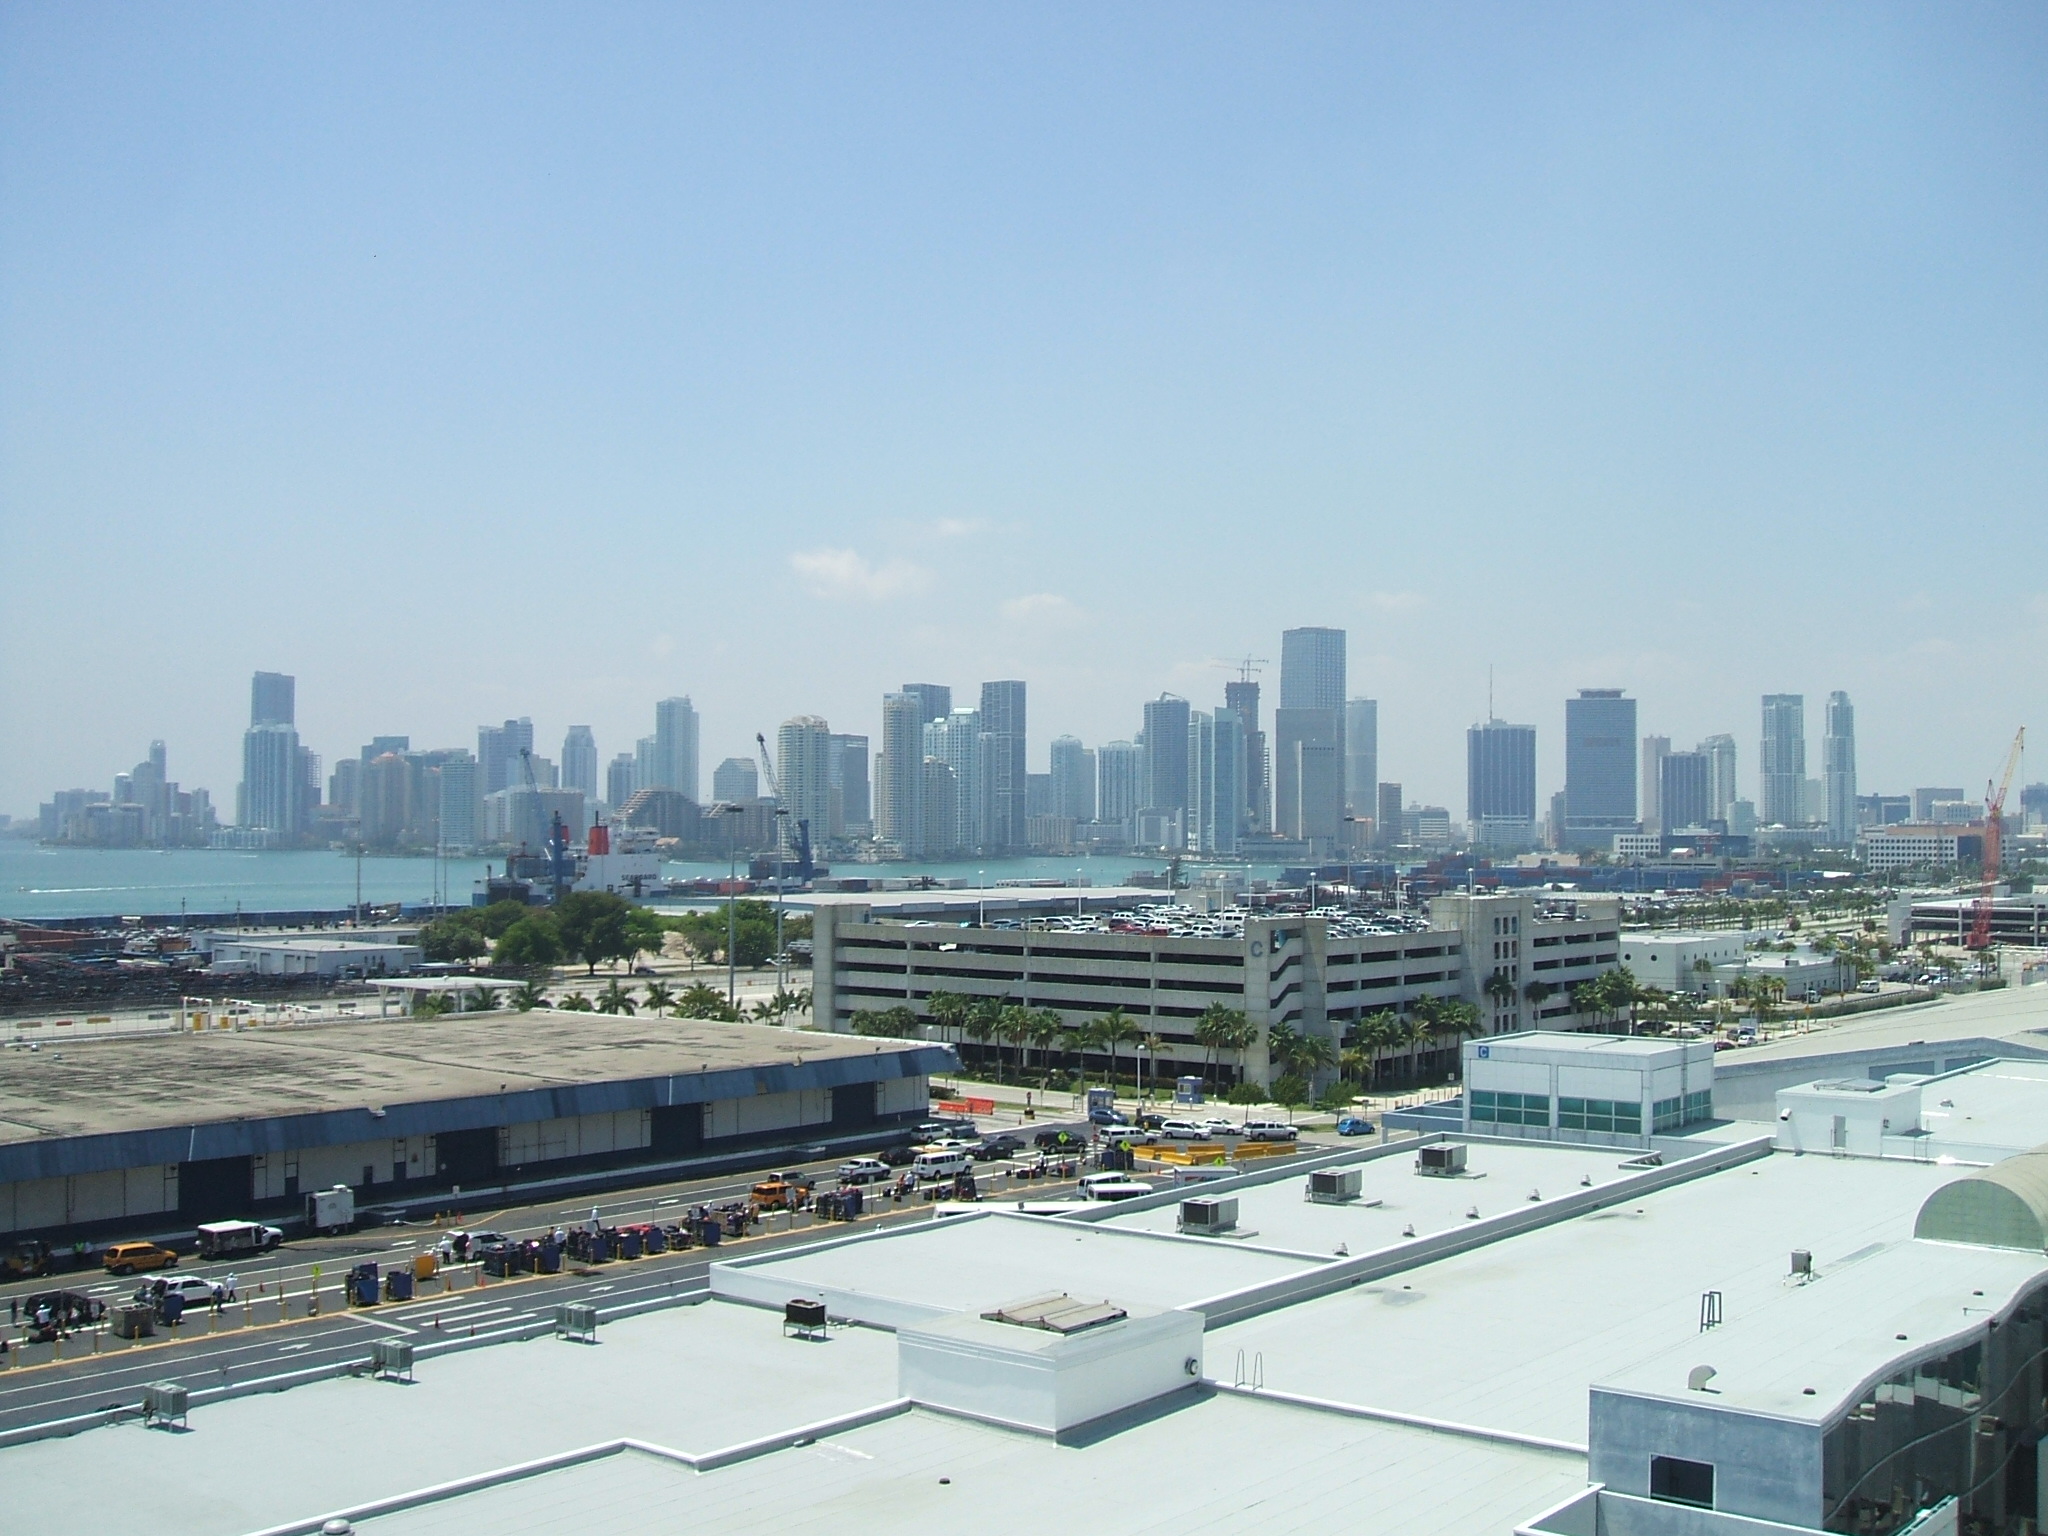 Miami_Viewed_from_Cruise_Ship_in_April_2009_-_panoramio.jpg